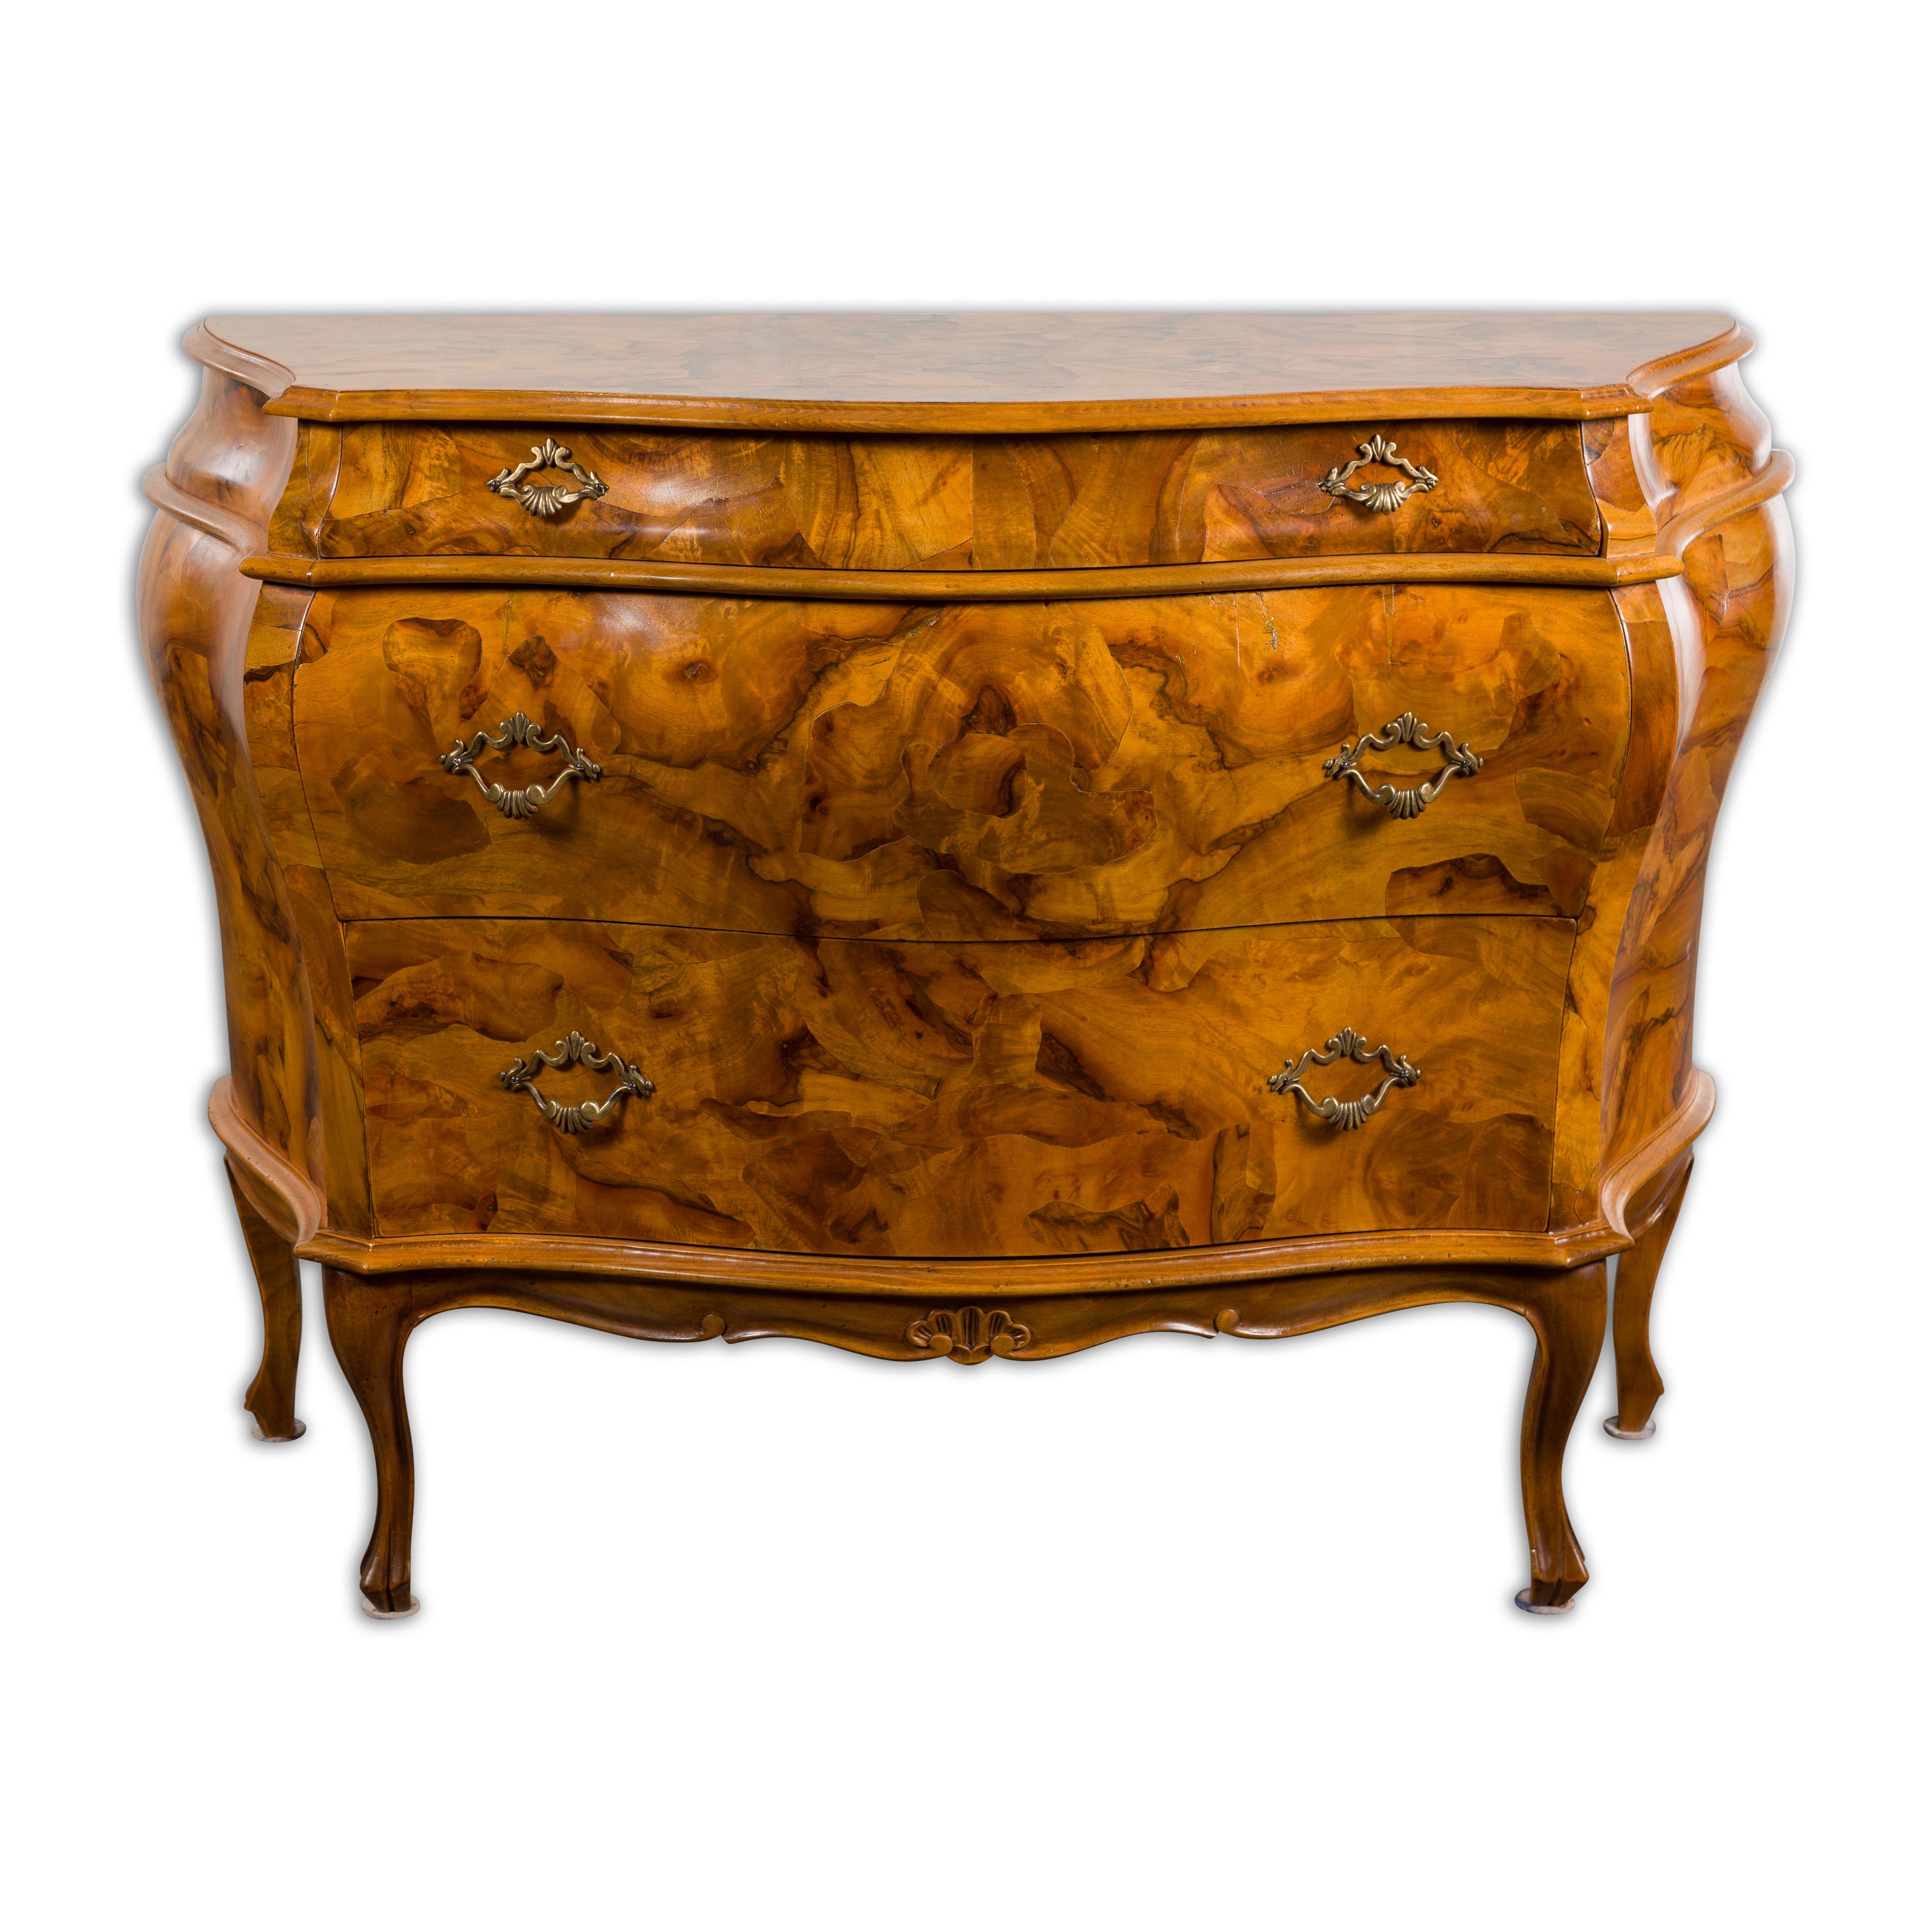 Italian Midcentury Rococo Style Bombé Chest with Three Drawers and Cabriole Legs For Sale 13